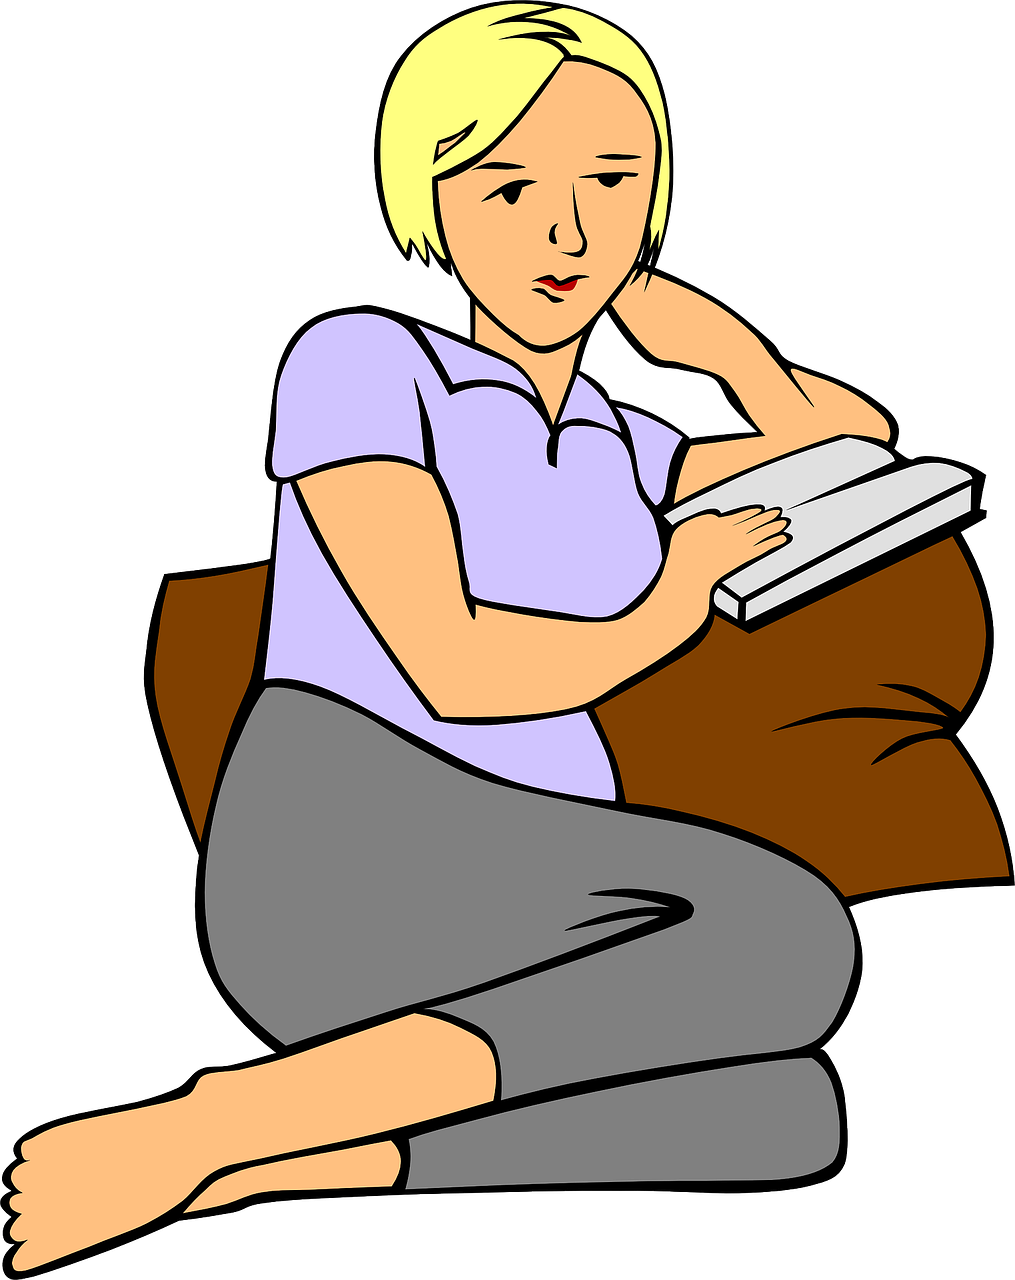 woman,reading,book,sitting,relaxing,pillow,couch,lady,learning,free vector graphics,free pictures, free photos, free images, royalty free, free illustrations, public domain